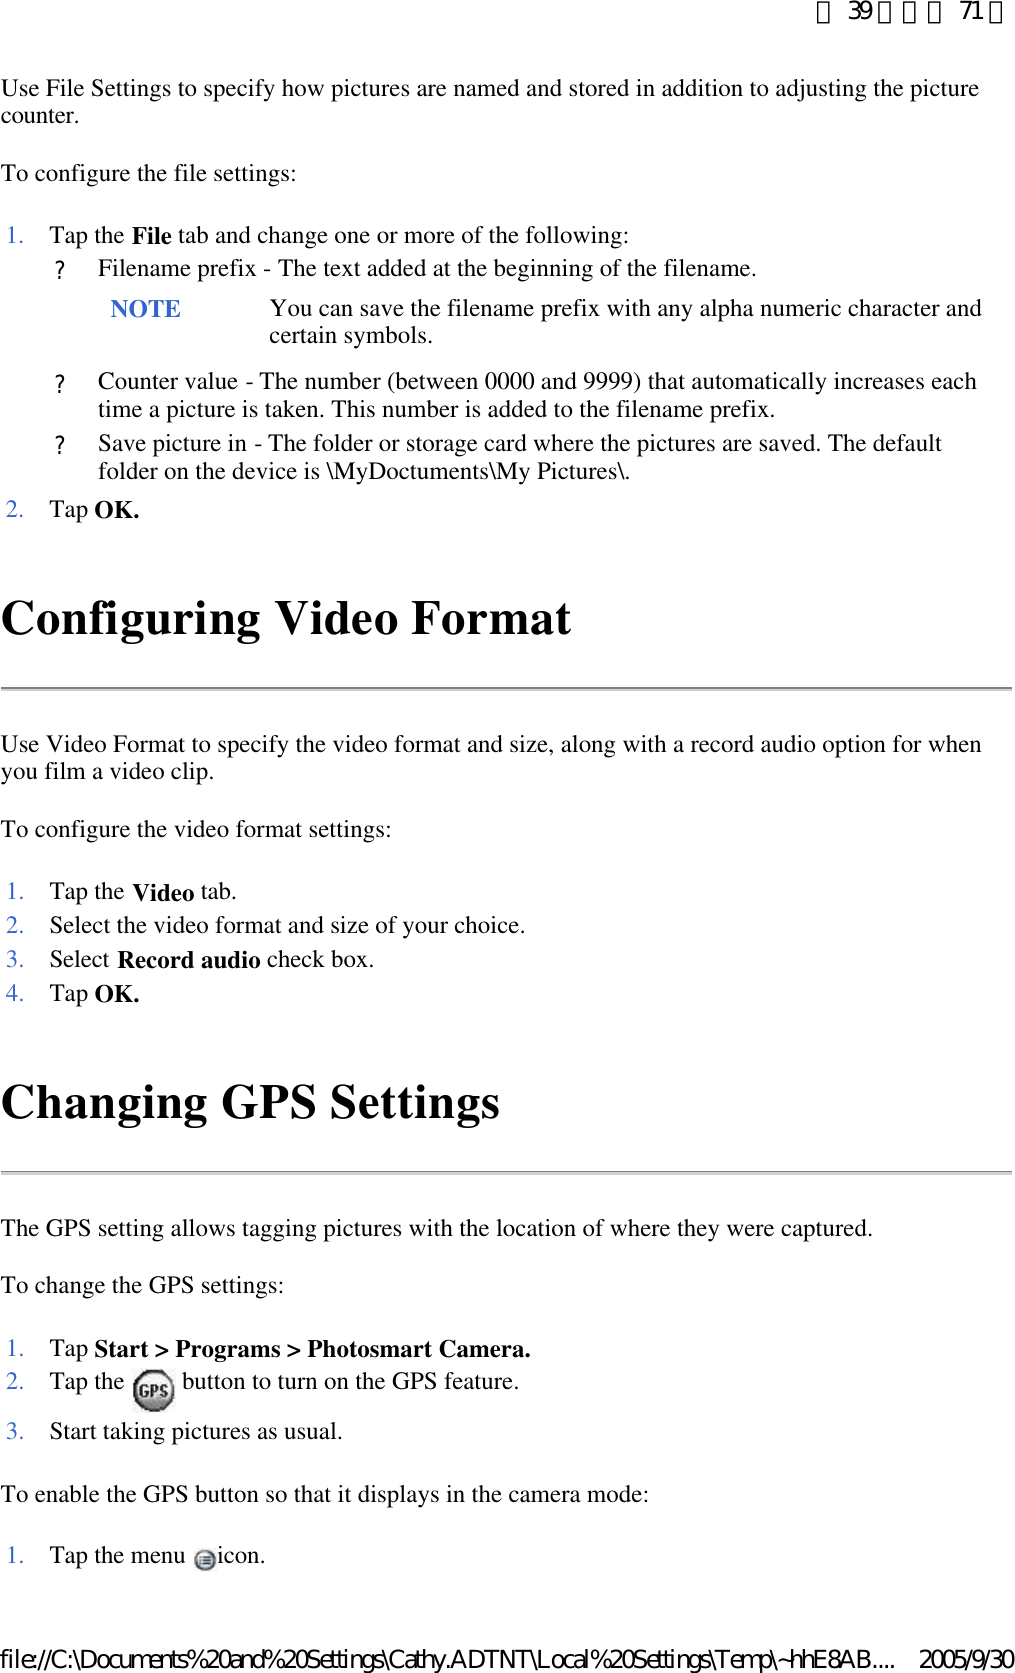 Use File Settings to specify how pictures are named and stored in addition to adjusting the picture counter. To configure the file settings: Configuring Video Format Use Video Format to specify the video format and size, along with a record audio option for when you film a video clip. To configure the video format settings: Changing GPS Settings The GPS setting allows tagging pictures with the location of where they were captured. To change the GPS settings: To enable the GPS button so that it displays in the camera mode: 1. Tap the File tab and change one or more of the following: ?Filename prefix - The text added at the beginning of the filename. NOTE You can save the filename prefix with any alpha numeric character and certain symbols. ?Counter value - The number (between 0000 and 9999) that automatically increases each time a picture is taken. This number is added to the filename prefix. ?Save picture in - The folder or storage card where the pictures are saved. The default folder on the device is \MyDoctuments\My Pictures\. 2. Tap OK.1. Tap the Video tab. 2. Select the video format and size of your choice.3. Select Record audio check box. 4. Tap OK.1. Tap Start &gt; Programs &gt; Photosmart Camera.2. Tap the   button to turn on the GPS feature. 3. Start taking pictures as usual.1. Tap the menu  icon. 第 39 頁，共 71 頁2005/9/30file://C:\Documents%20and%20Settings\Cathy.ADTNT\Local%20Settings\Temp\~hhE8AB....